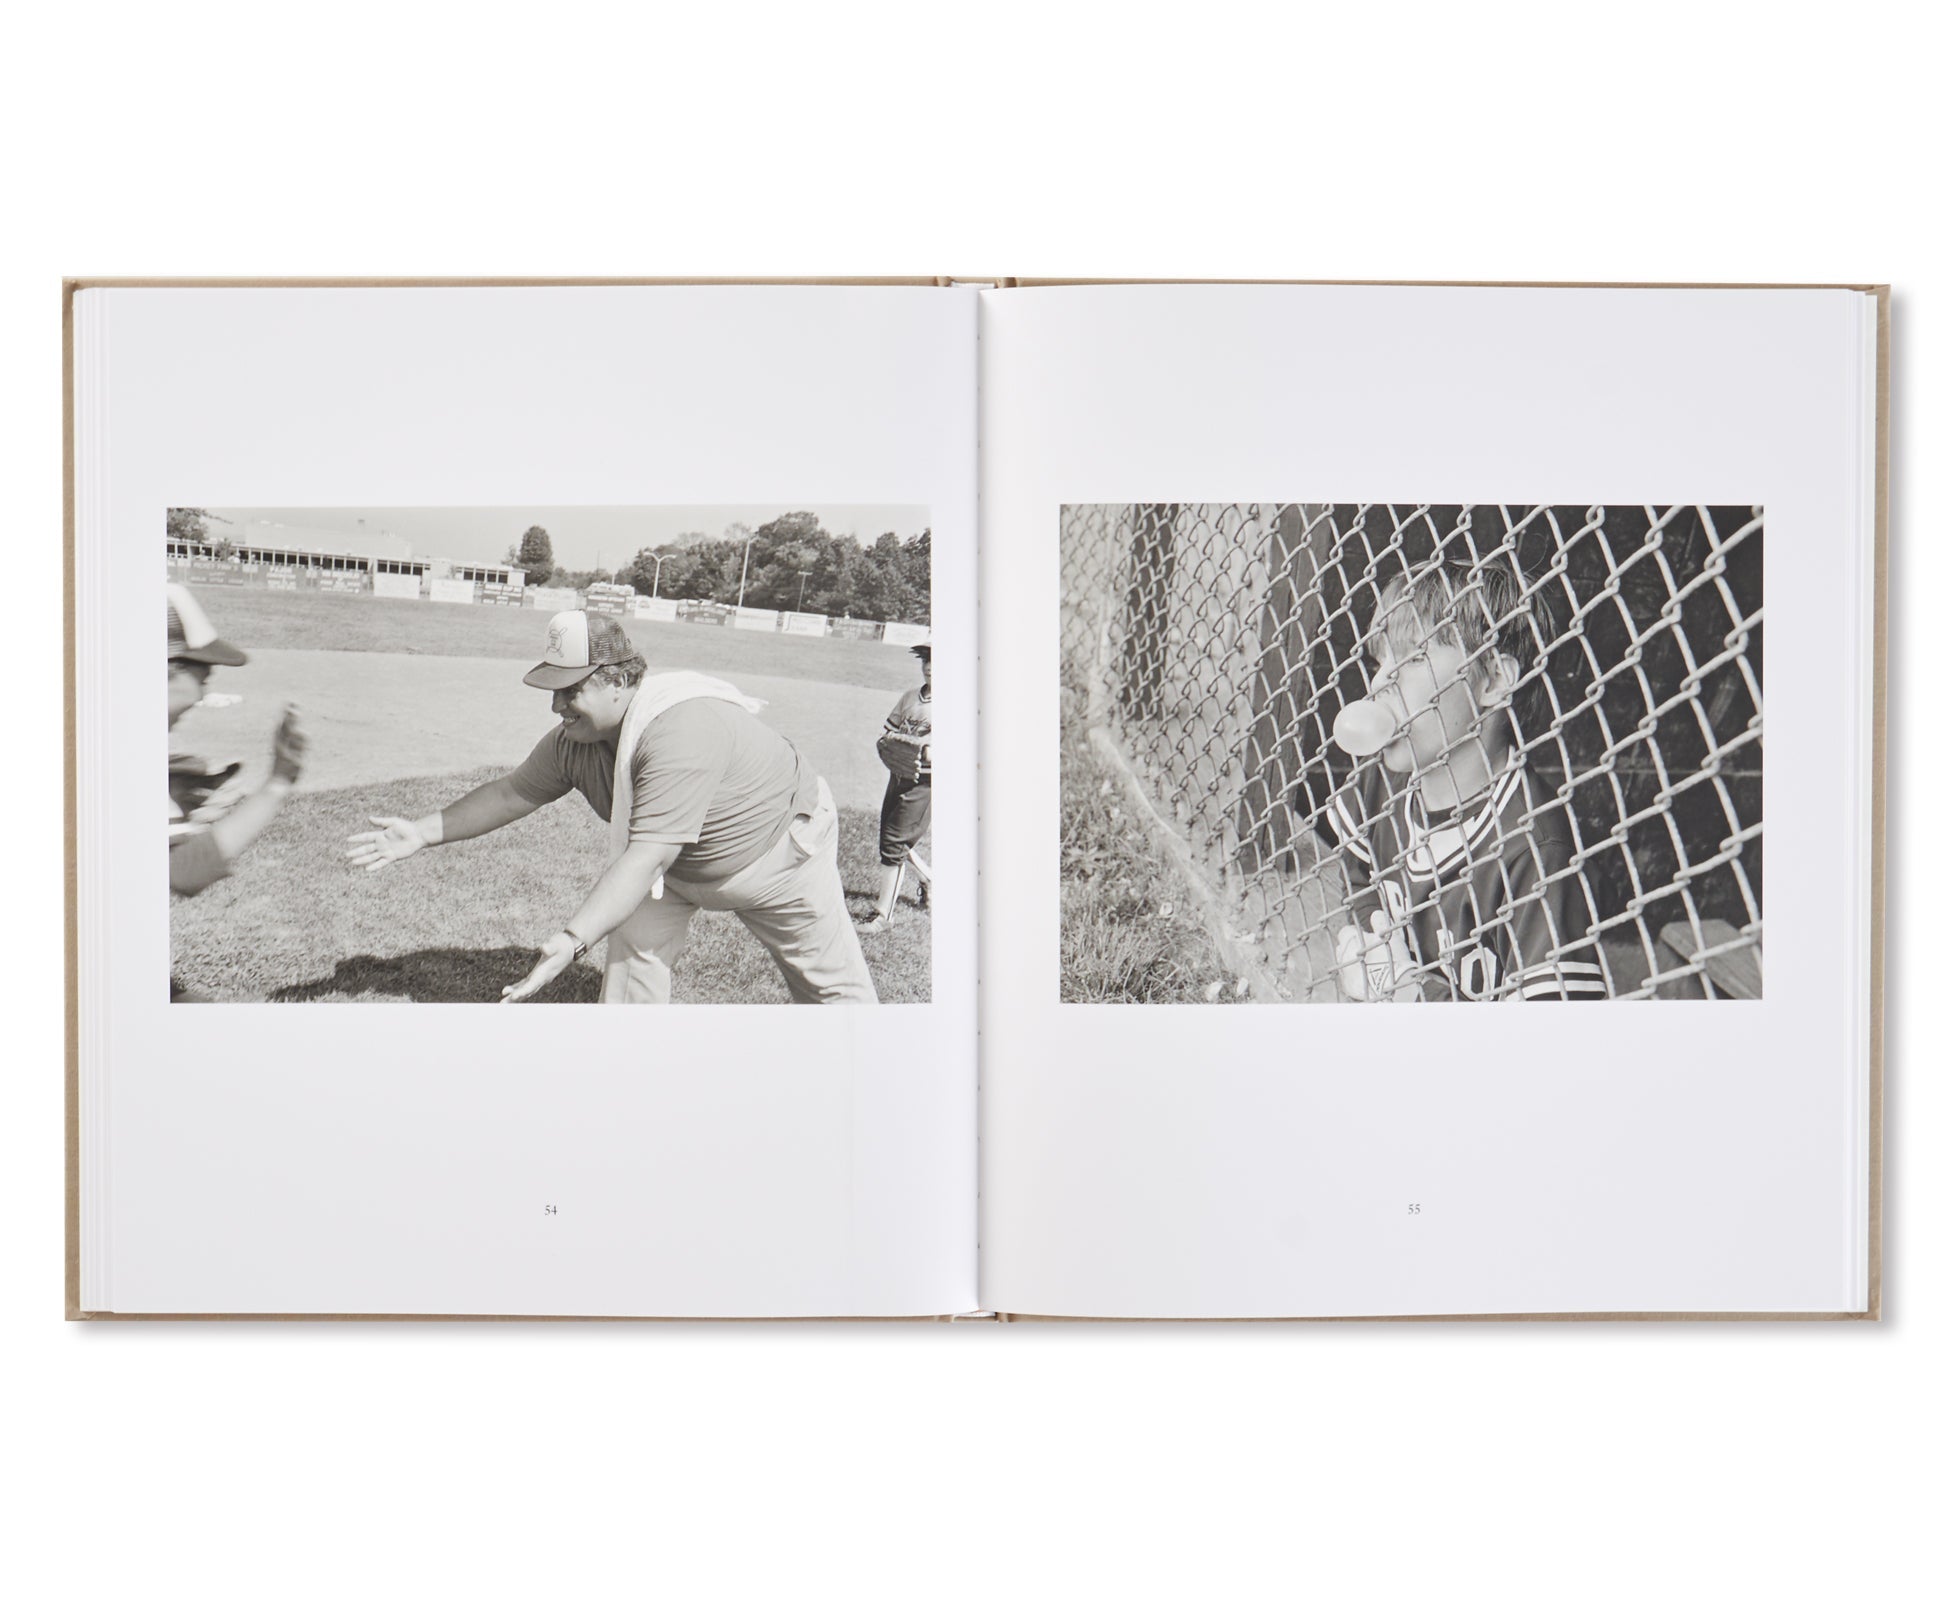 THE PLAYERS by Mark Steinmetz [FIRST EDITION / SIGNED]